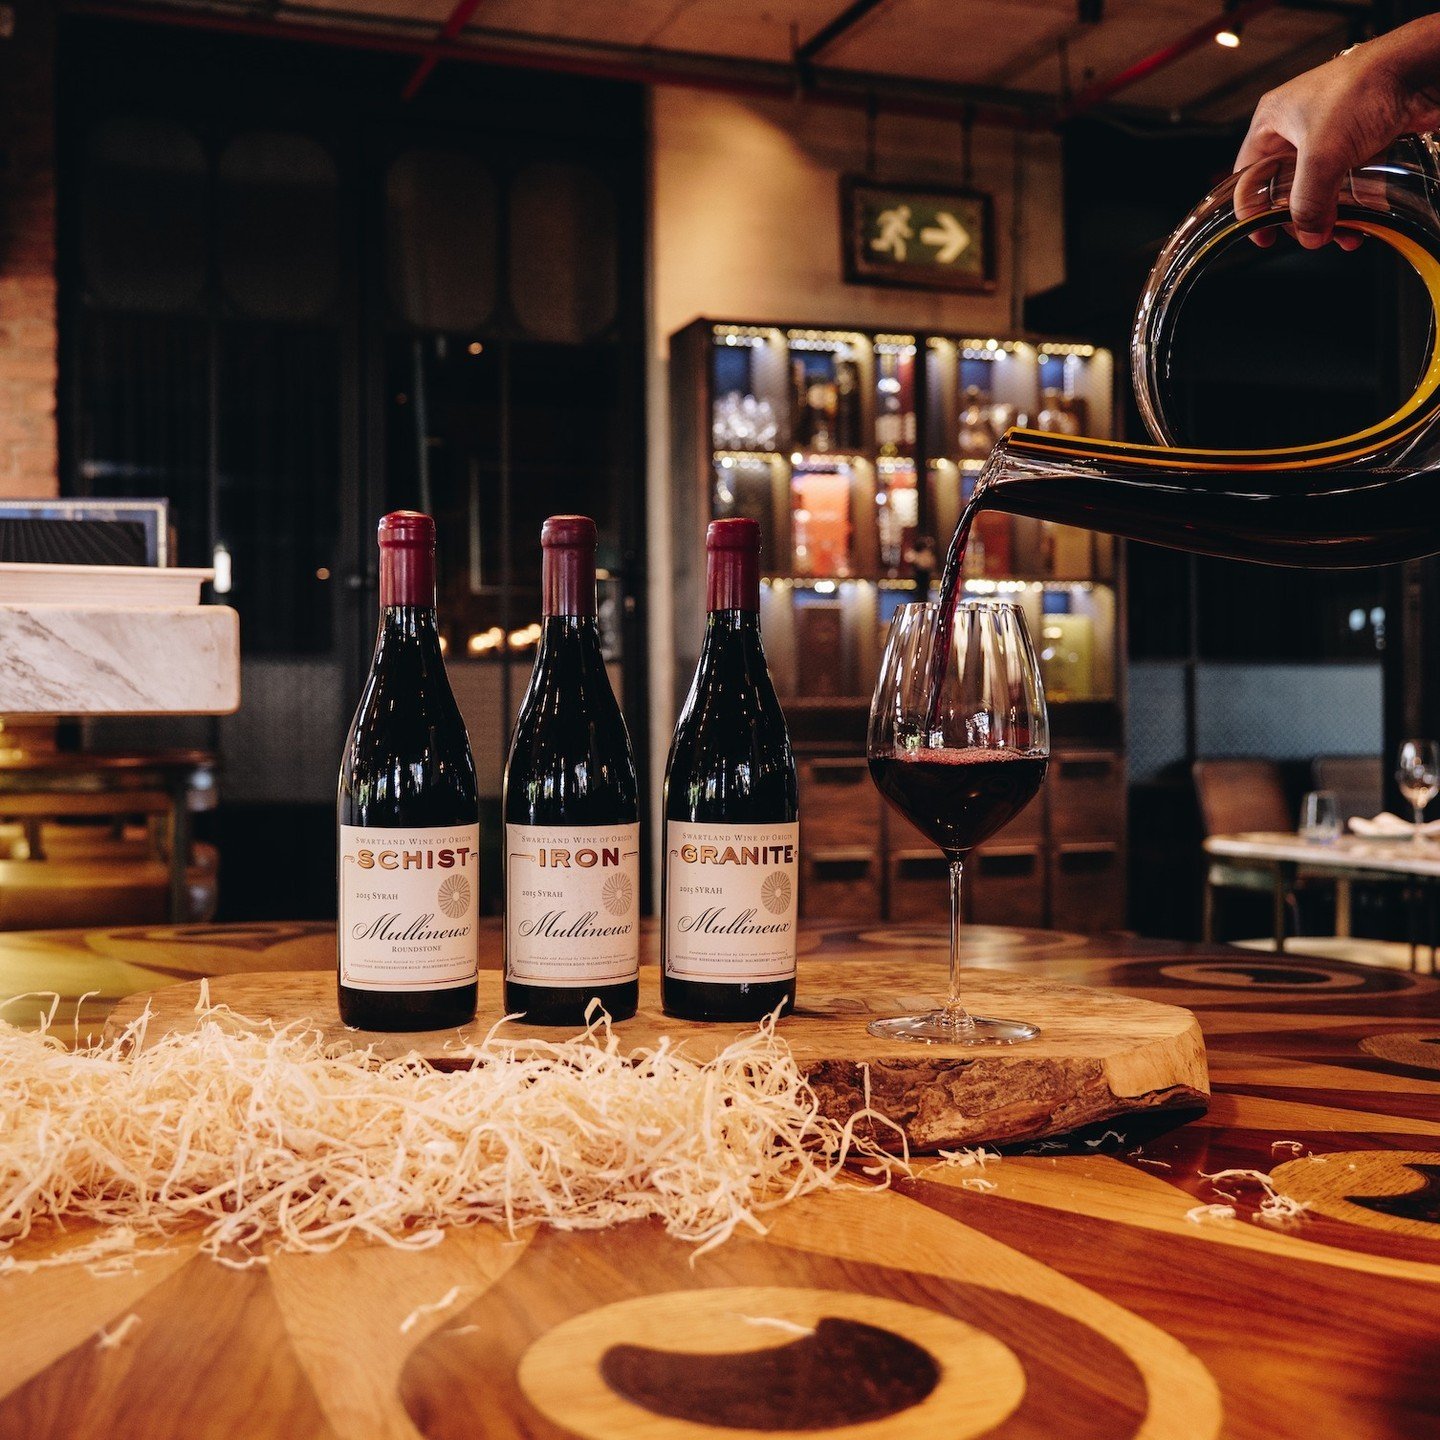 FOOD &amp; WINE PAIRING DINNER WITH MULLINEUX WINES

Join us for a night of luxurious indulgence featuring the exquisite Mullineux Wines hosted by Chris and Andrea Mullineux themselves.

Husband and wife winemaker team, Chris and Andrea Mullineux, se